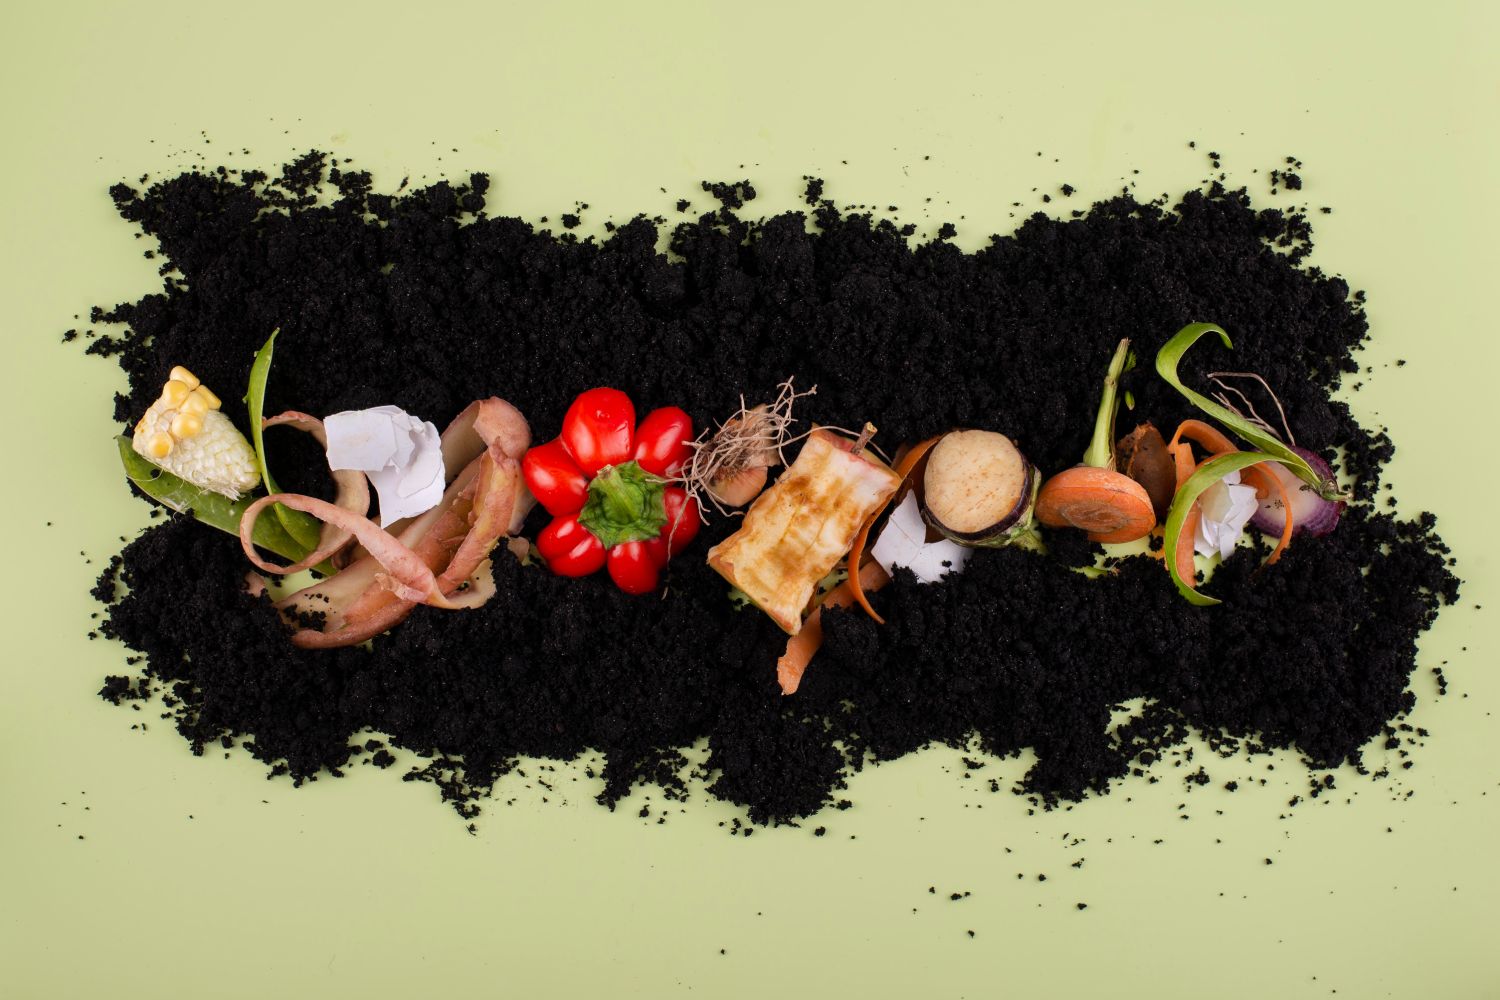 Compost and food scraps